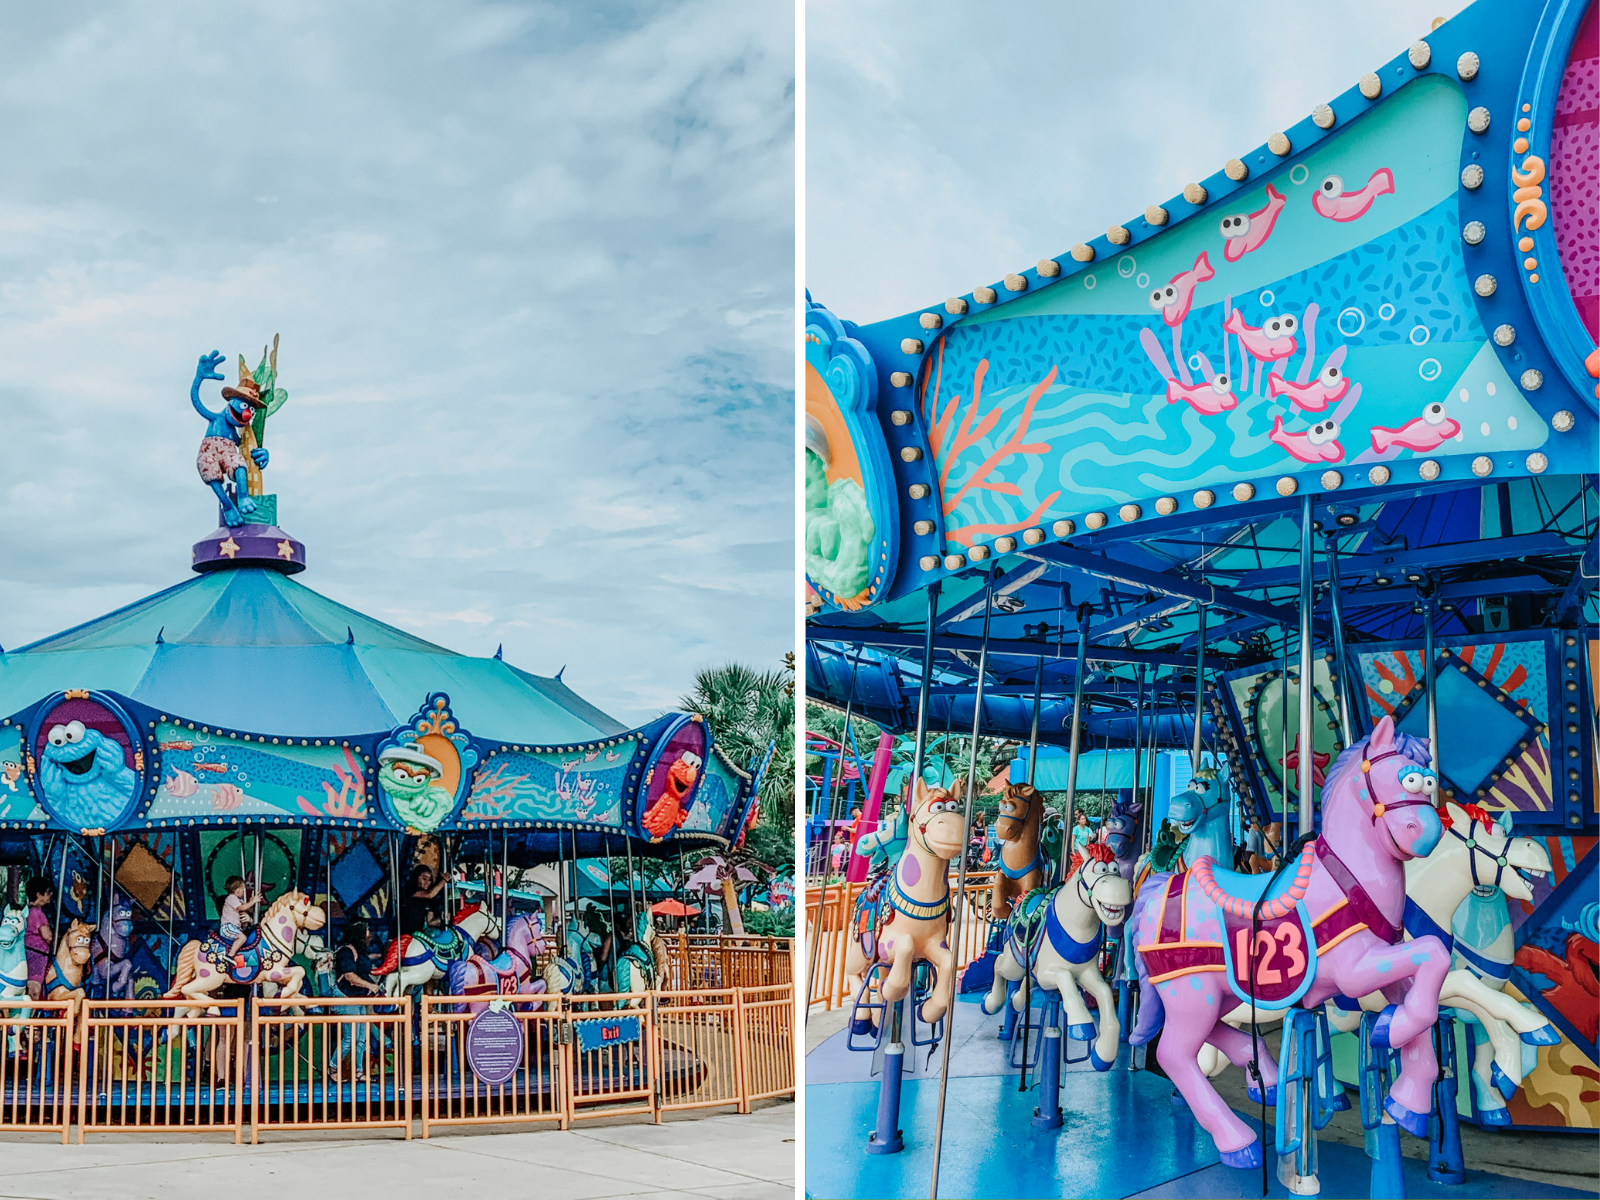 Top 10 Kid Friendly Activities in San Antonio by popular Texas travel blog, Lone Star Looking Glass: image of a carousel at Sea World San Antonio.